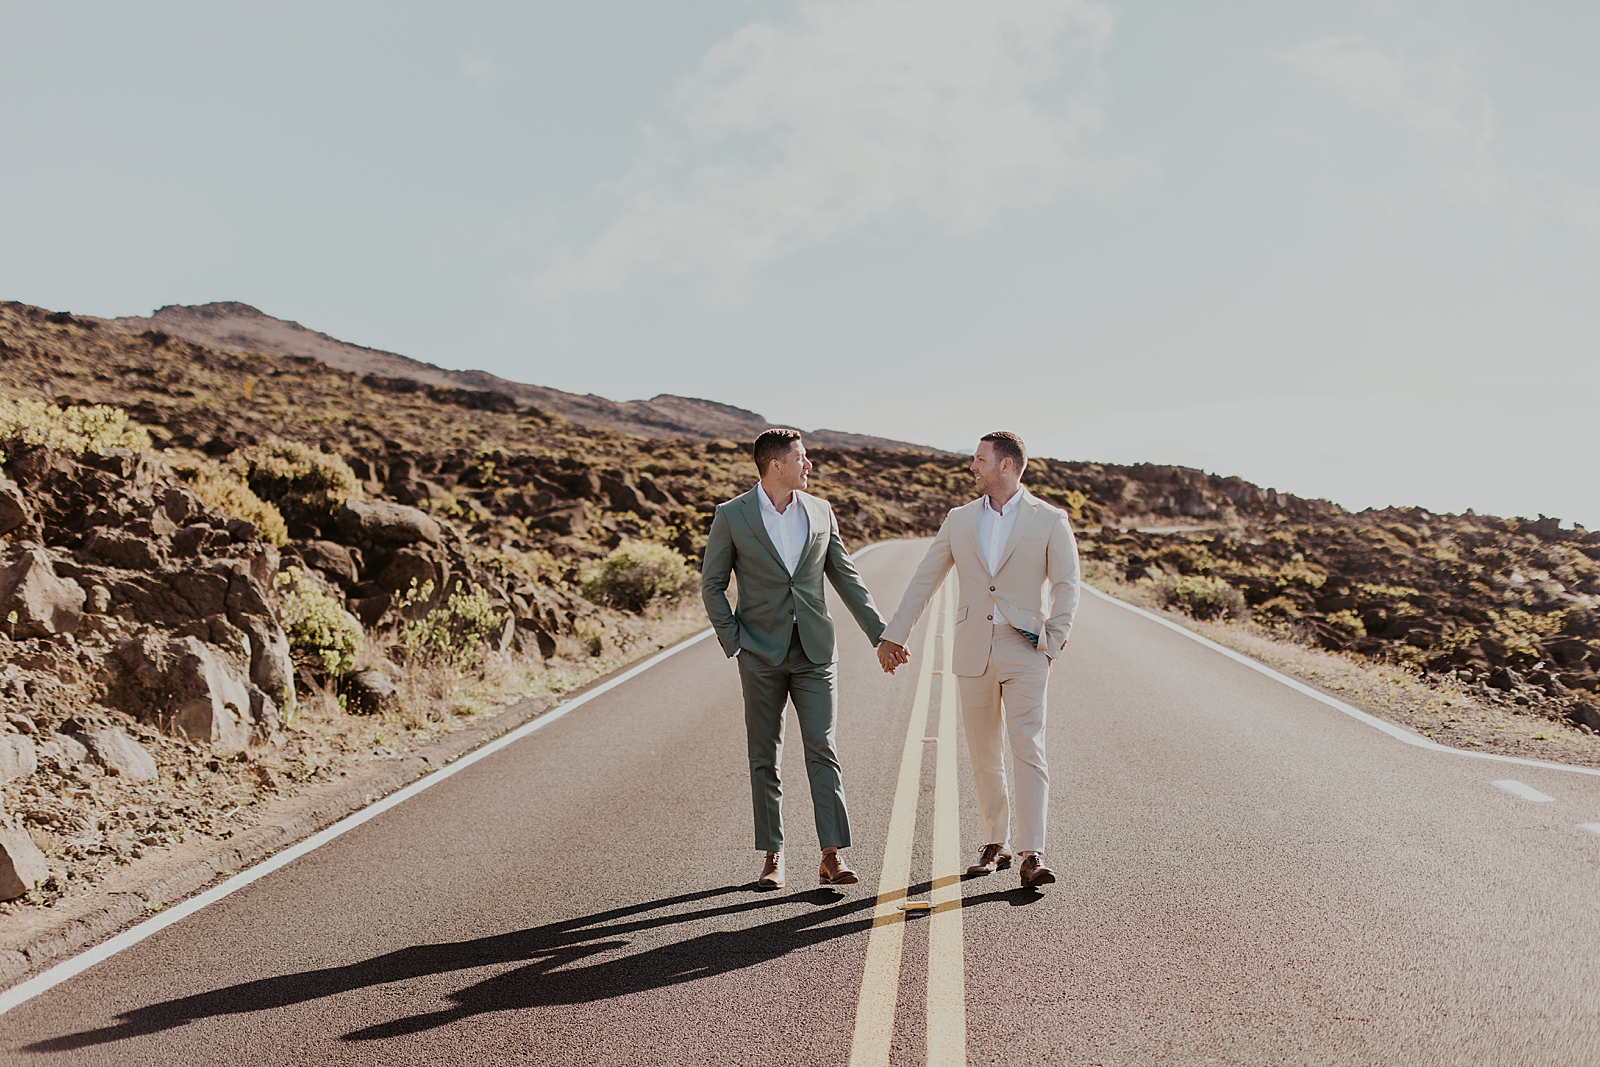 Grooms holding hands while standing on the open road